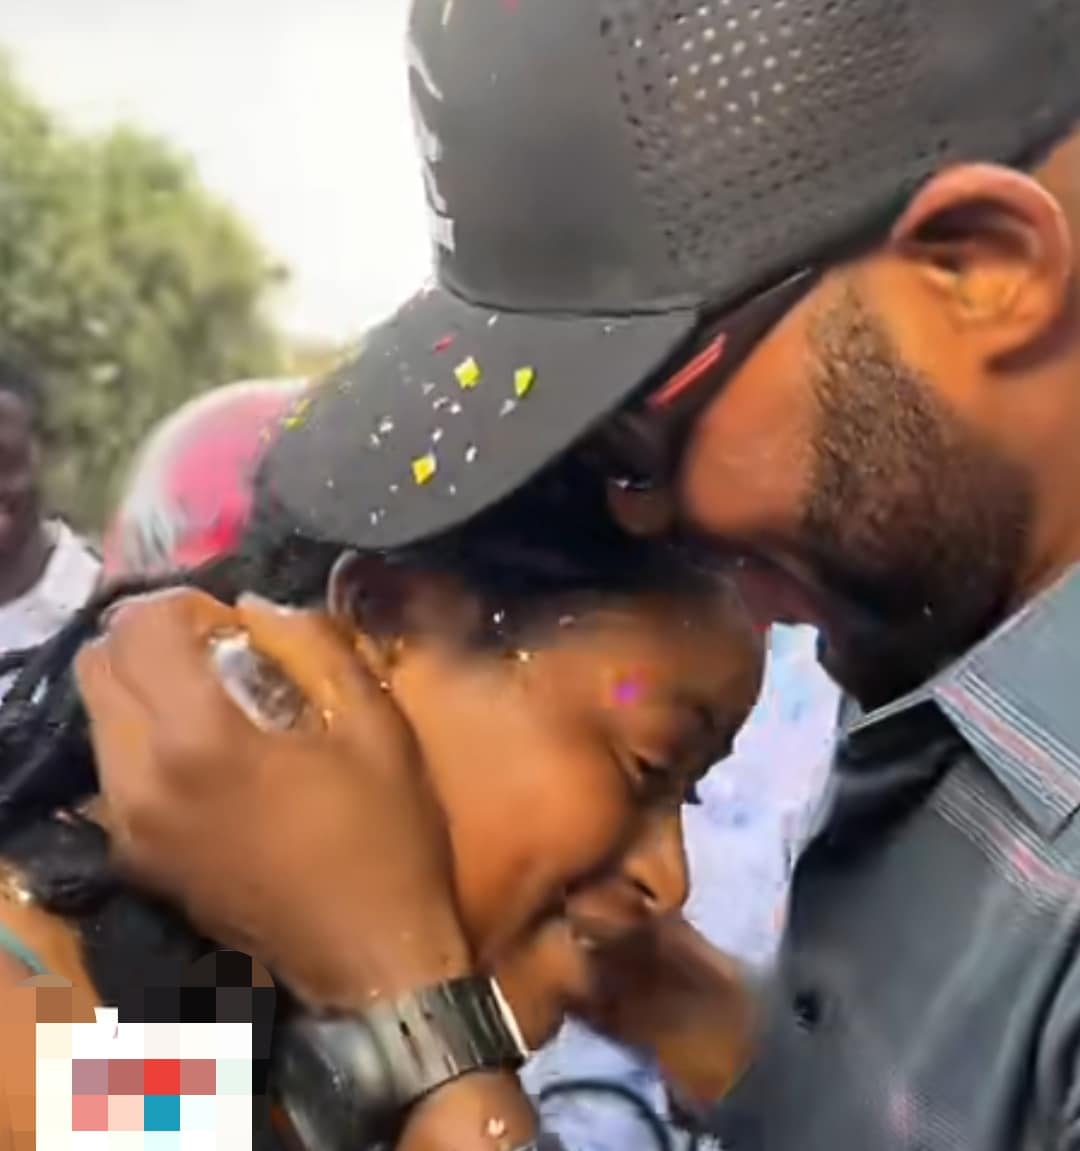 "Another day to cry tear of joy" - Heartwarming scene as Nigerian man proposes to girlfriend on her graduation day